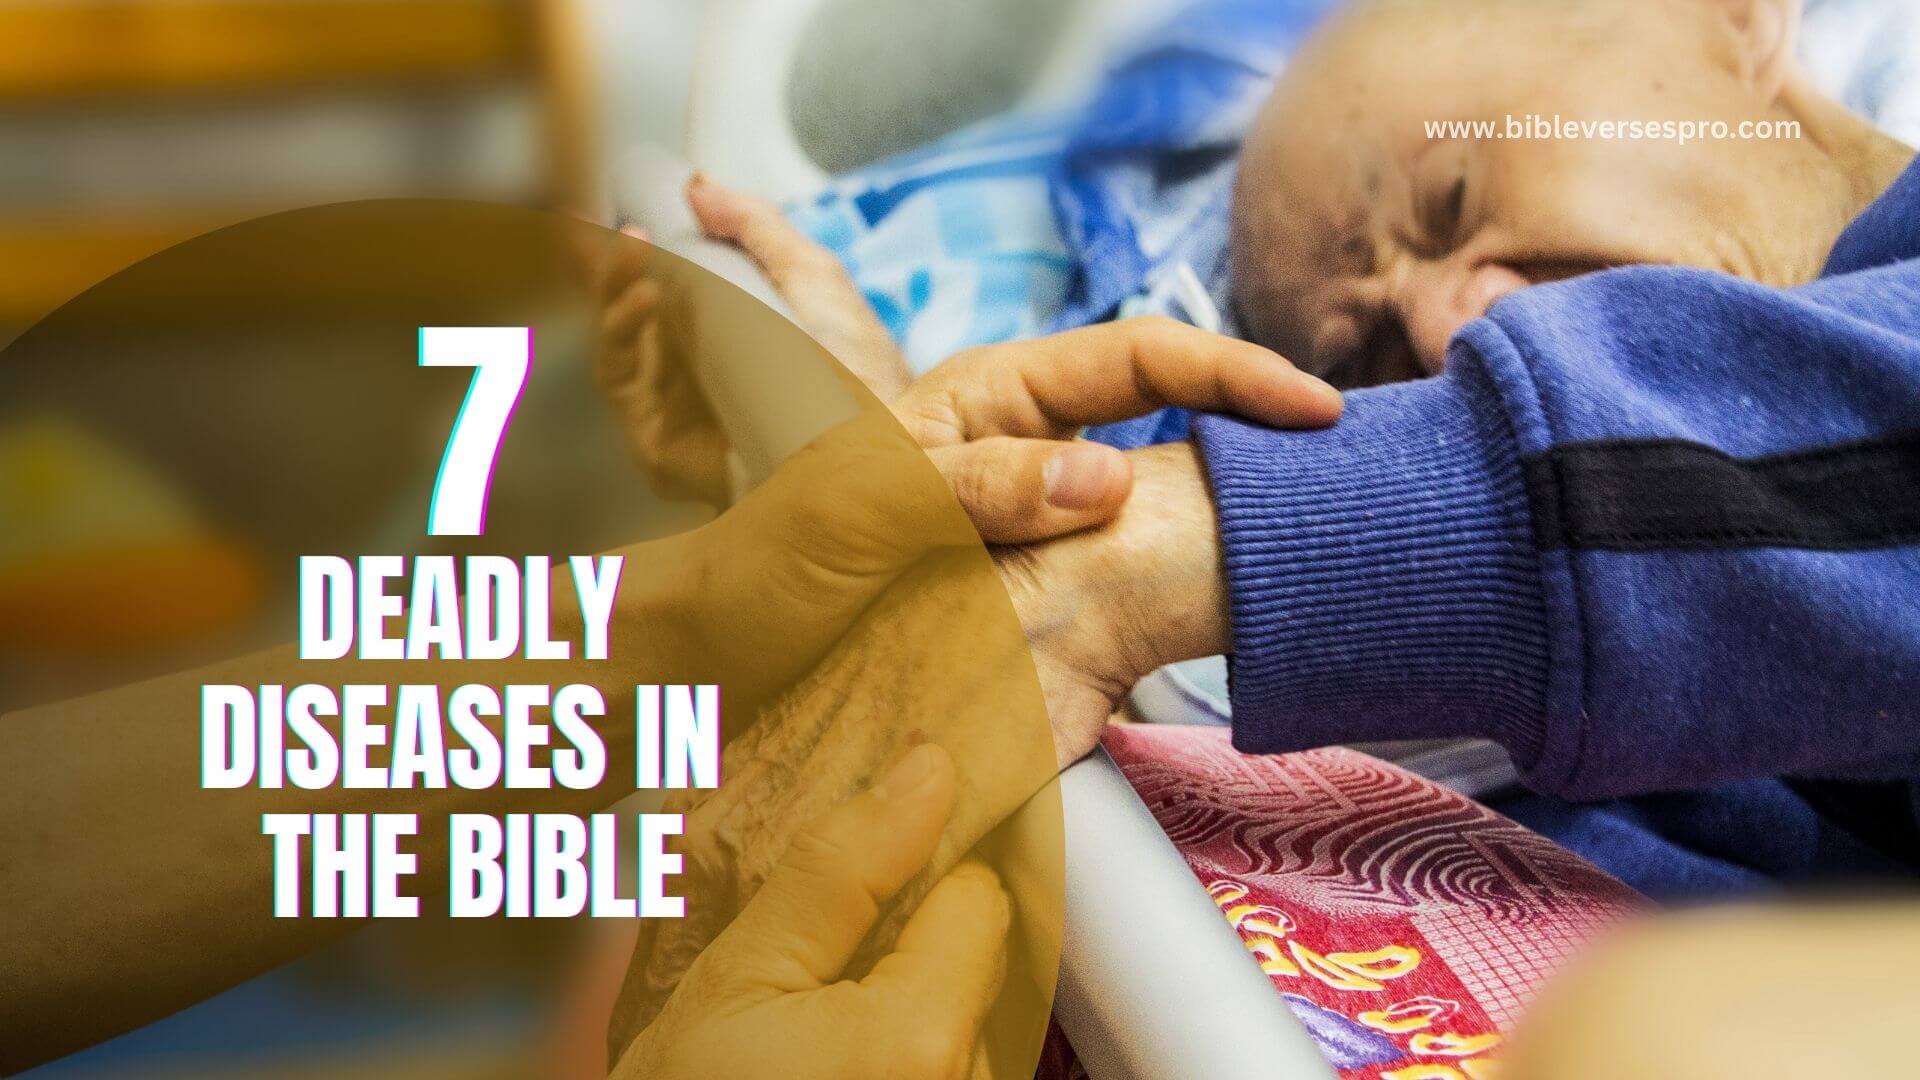 DEADLY DISEASES IN THE BIBLE (1)